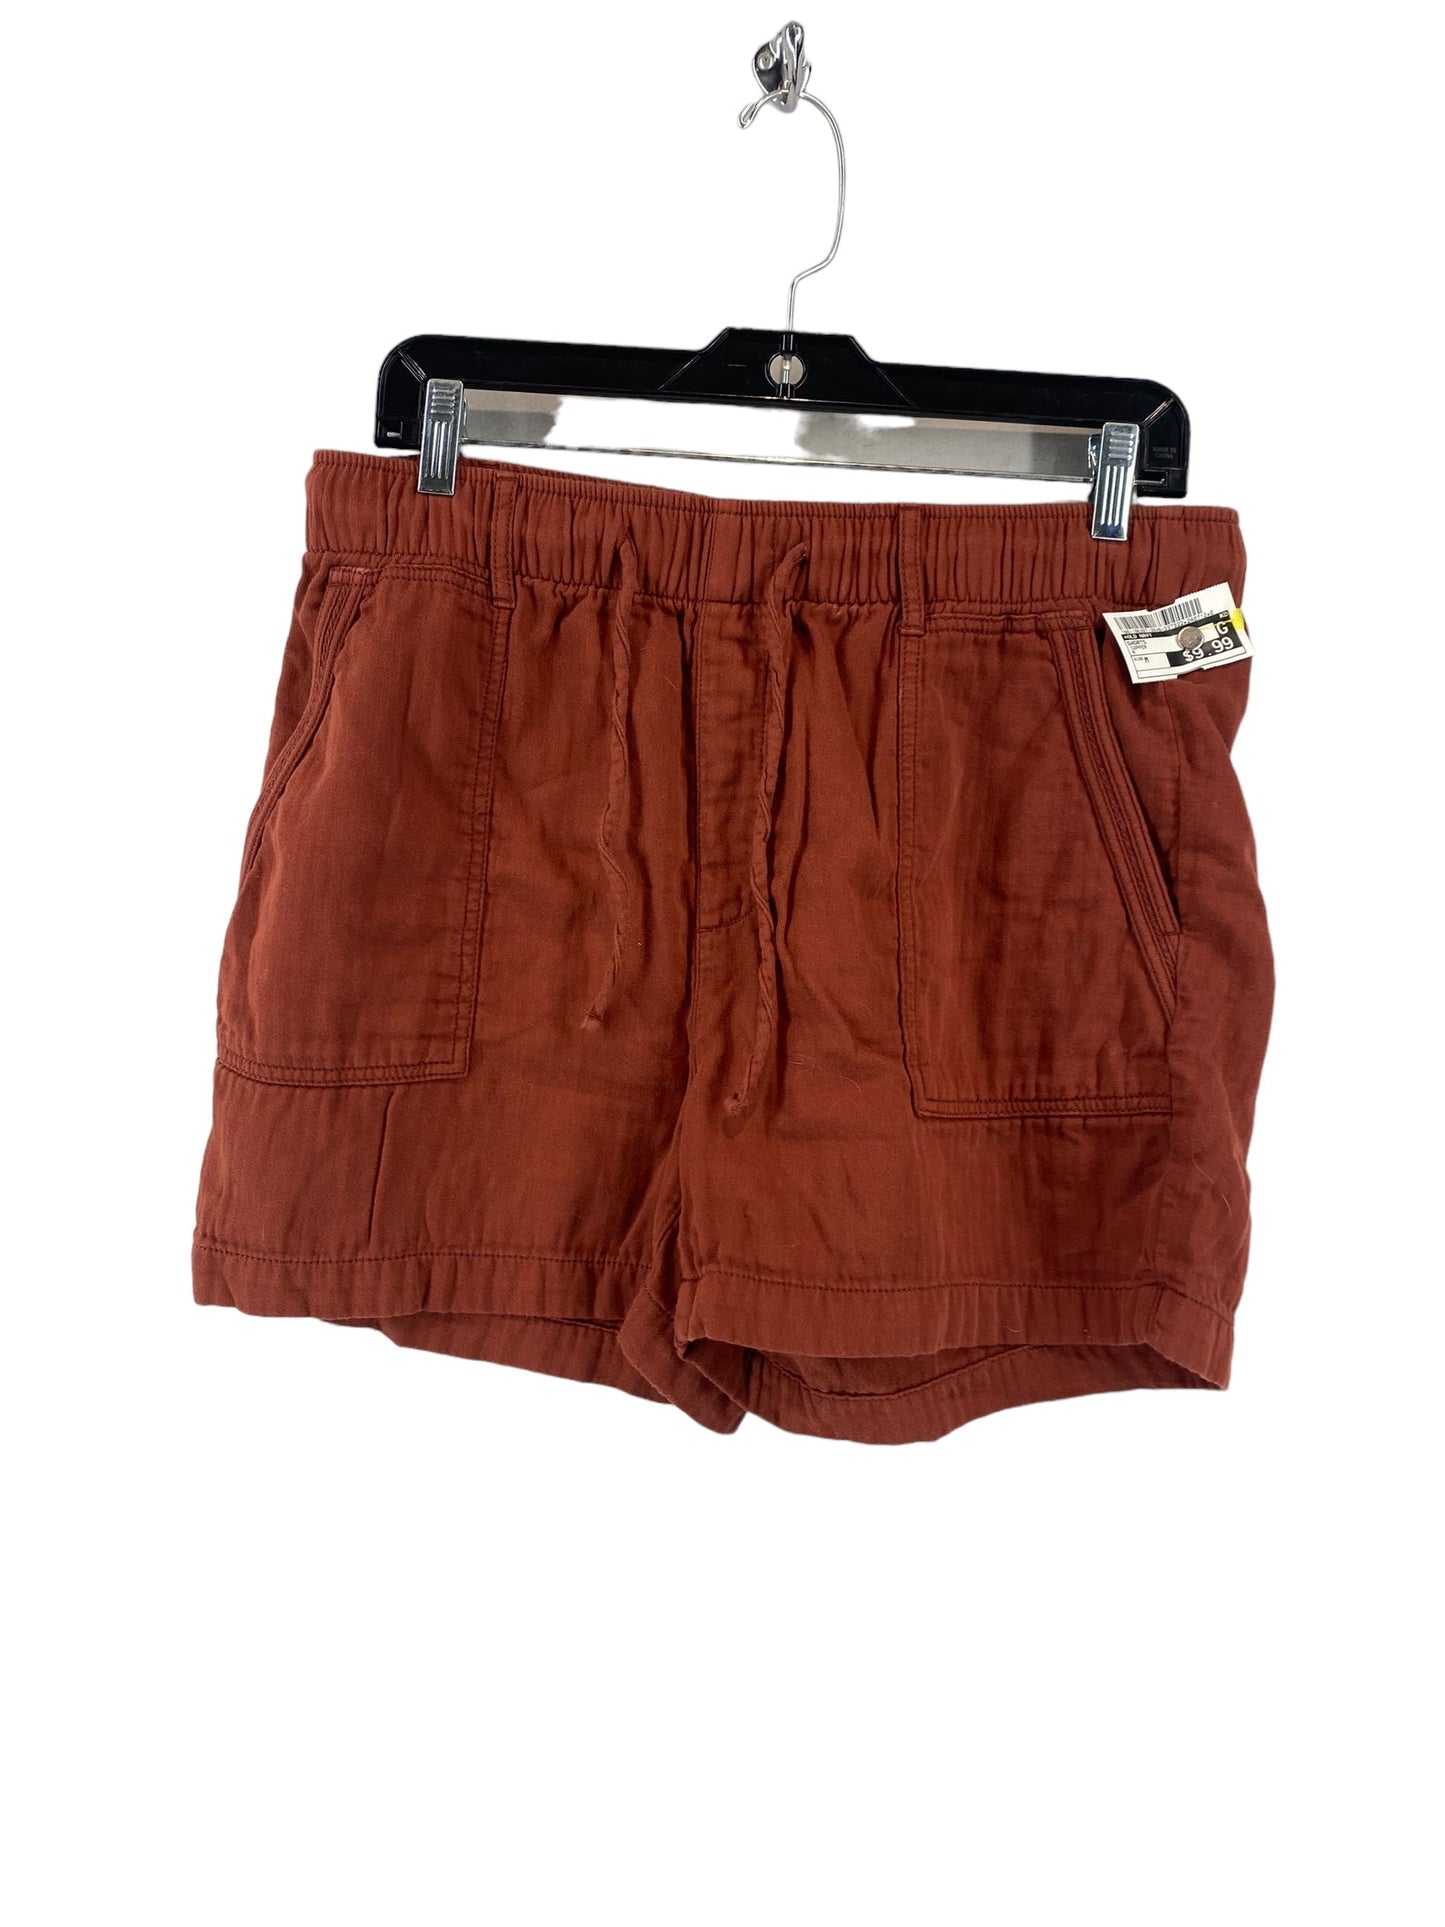 Copper Shorts Old Navy, Size M